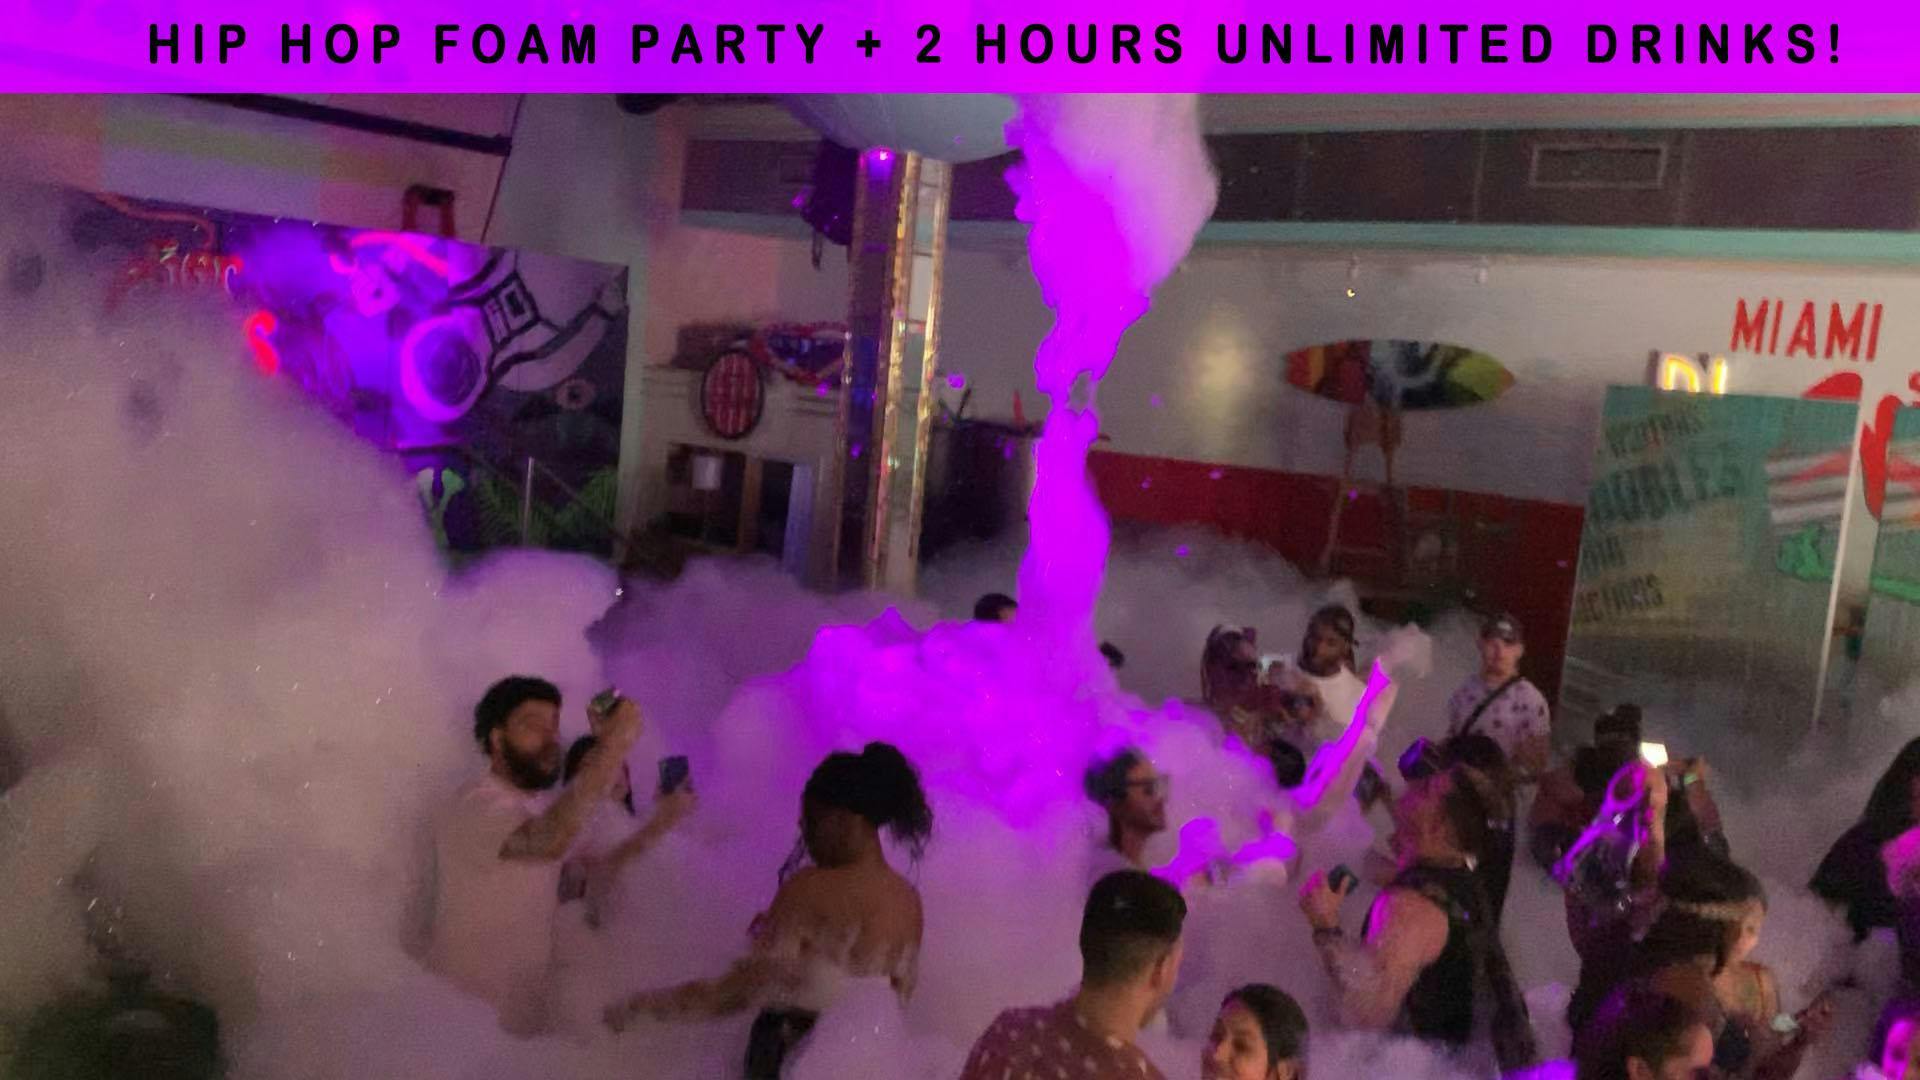 Hip Hop Sunday FOAM PARTY + 2 Hours of FREE DRINKS - Miami Beach